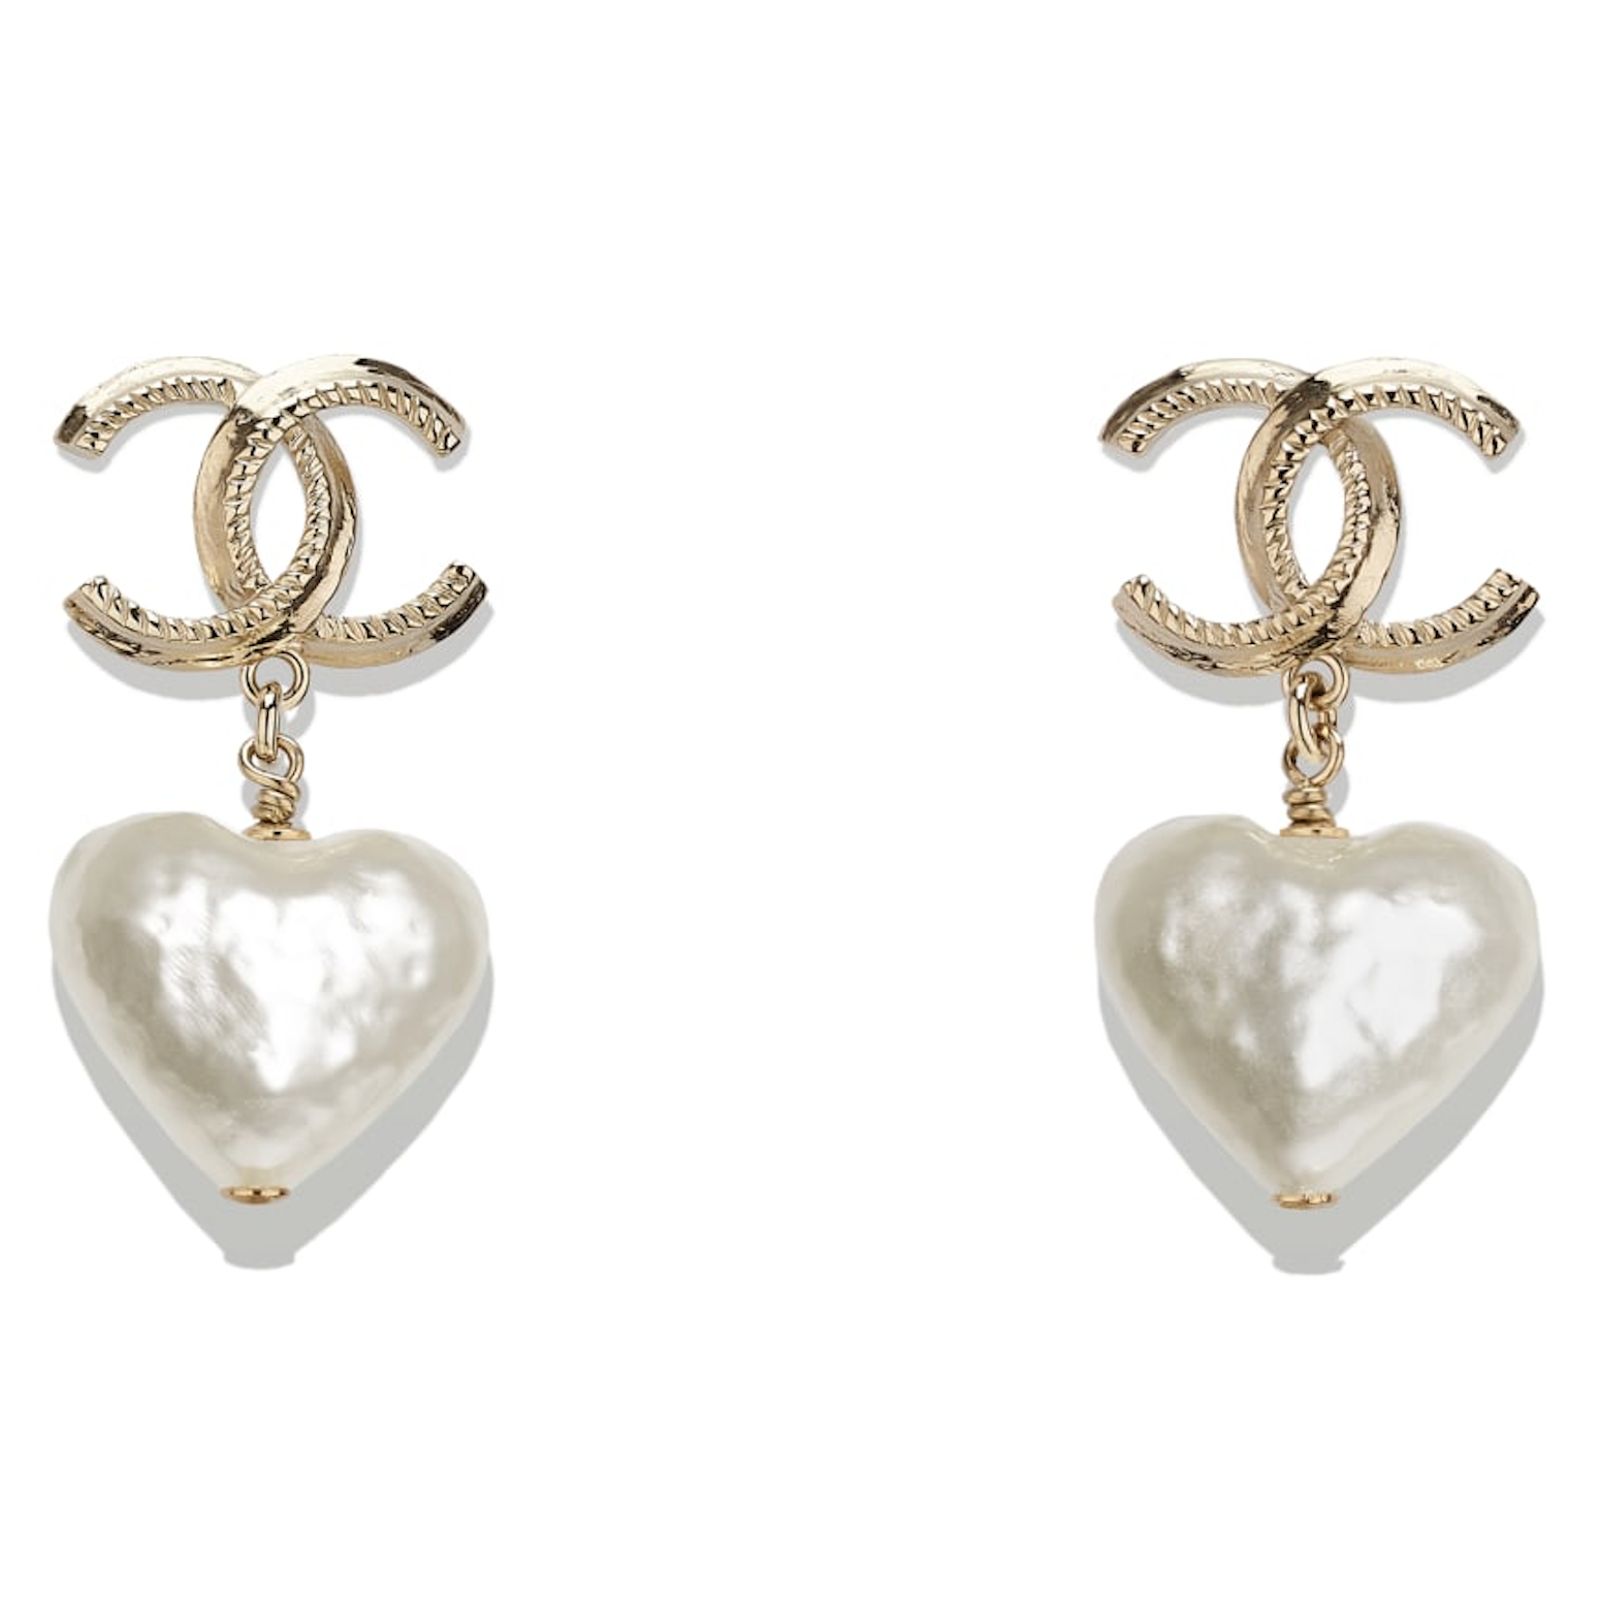 Chanel Chanel 22C Gold Heart Pearly White CC Statement Earrings